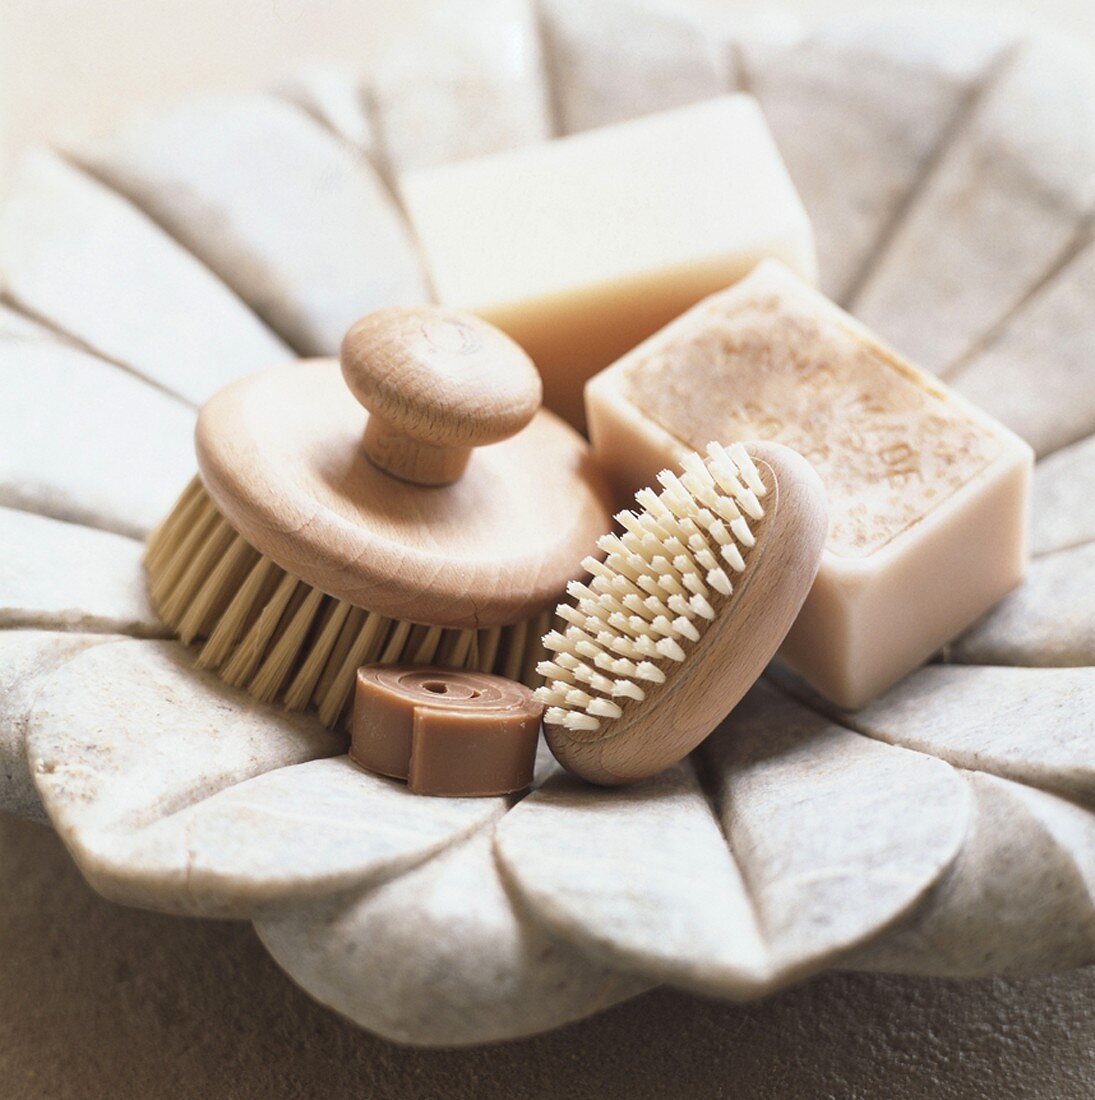 Various soaps & brushes in dish